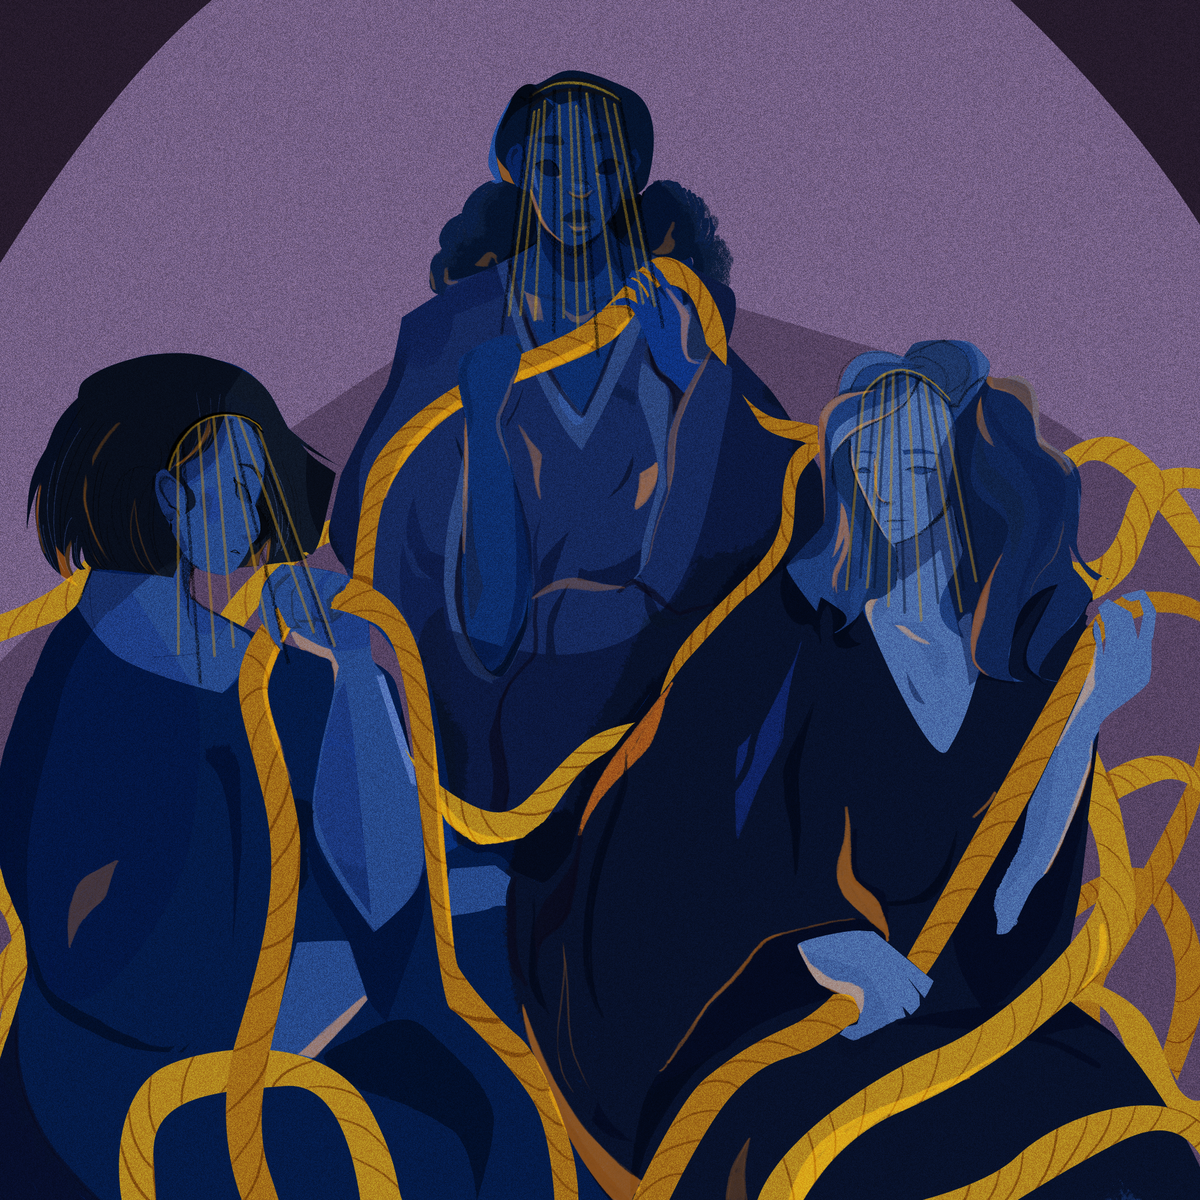 Blue silhouettes of the three Fates, divine women of the underworld, unravel a winding golden rope